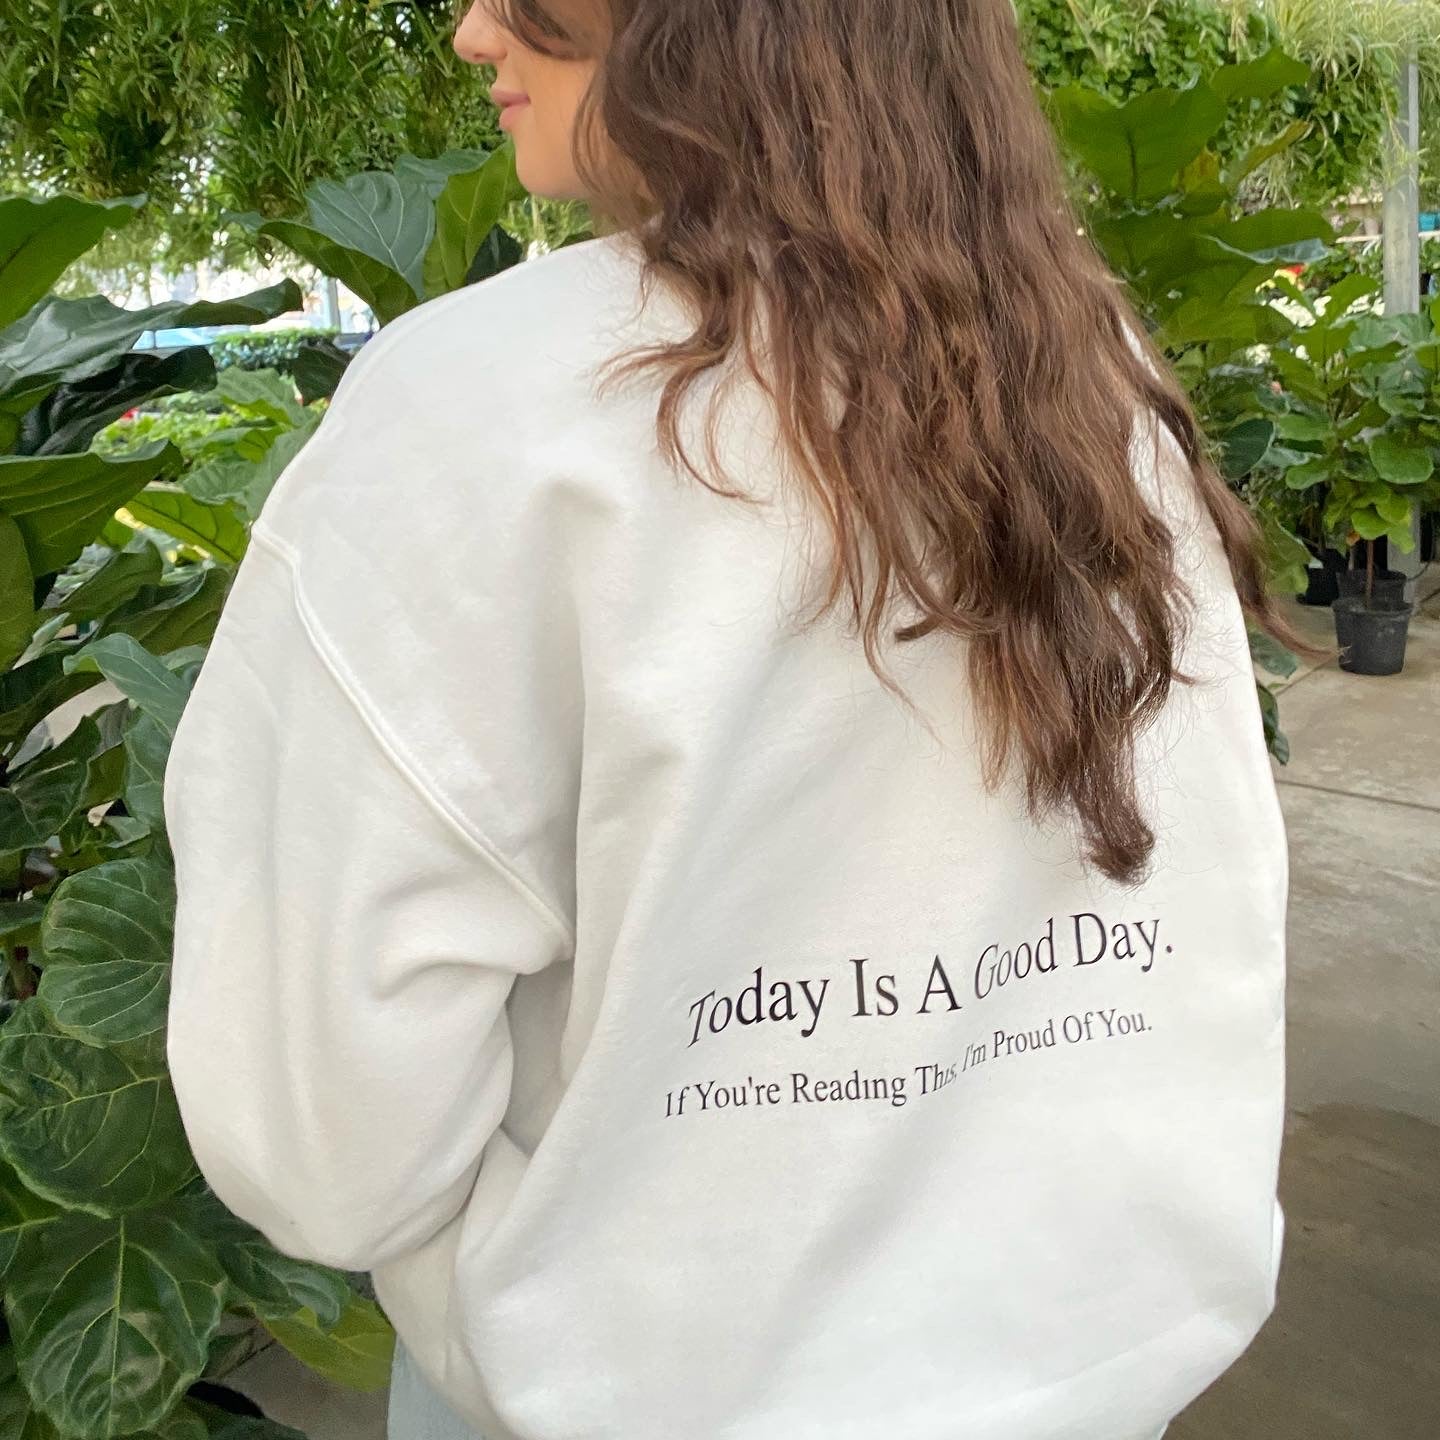 "Today Is A Good Day" Top